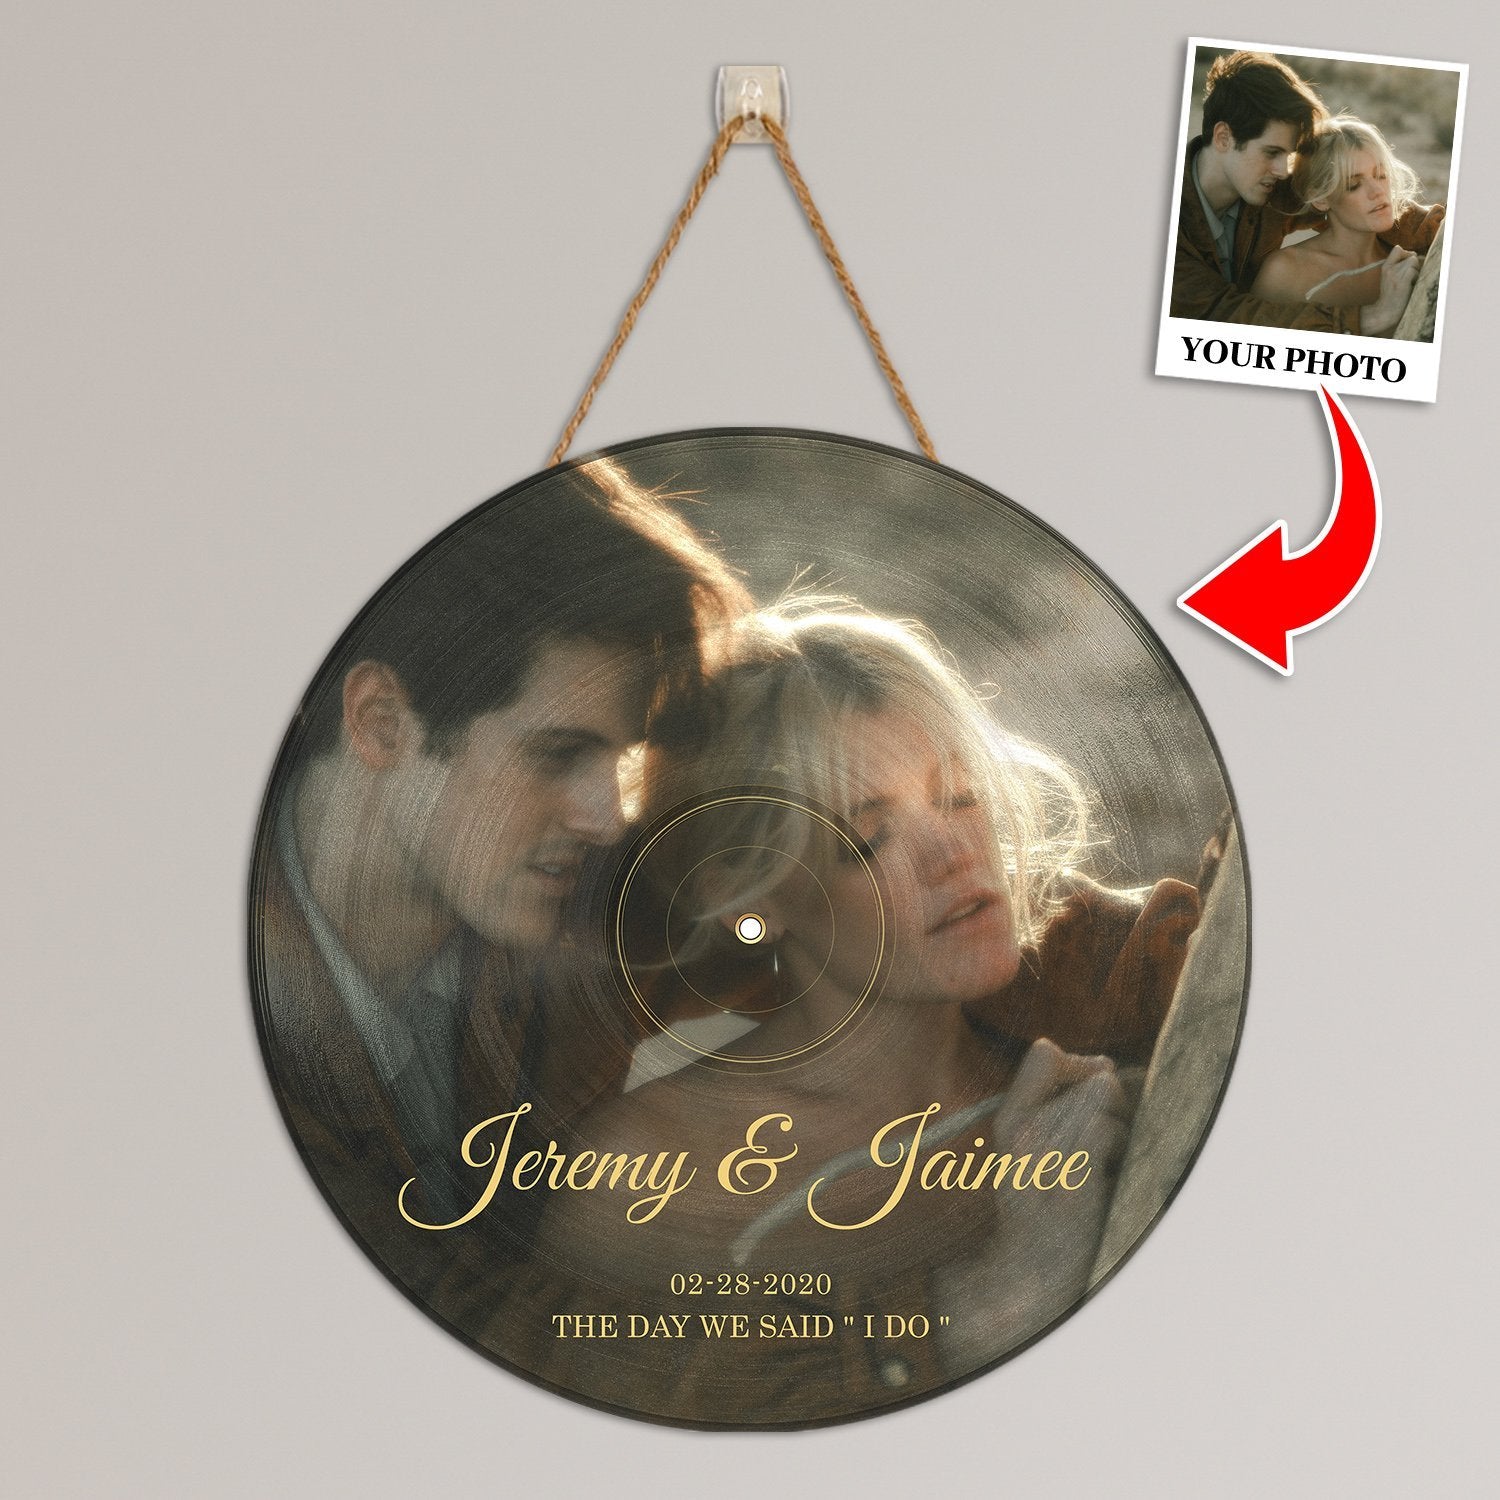 A wooden board with a wedding image will be an ornament that brings warmth to his bedroom. 